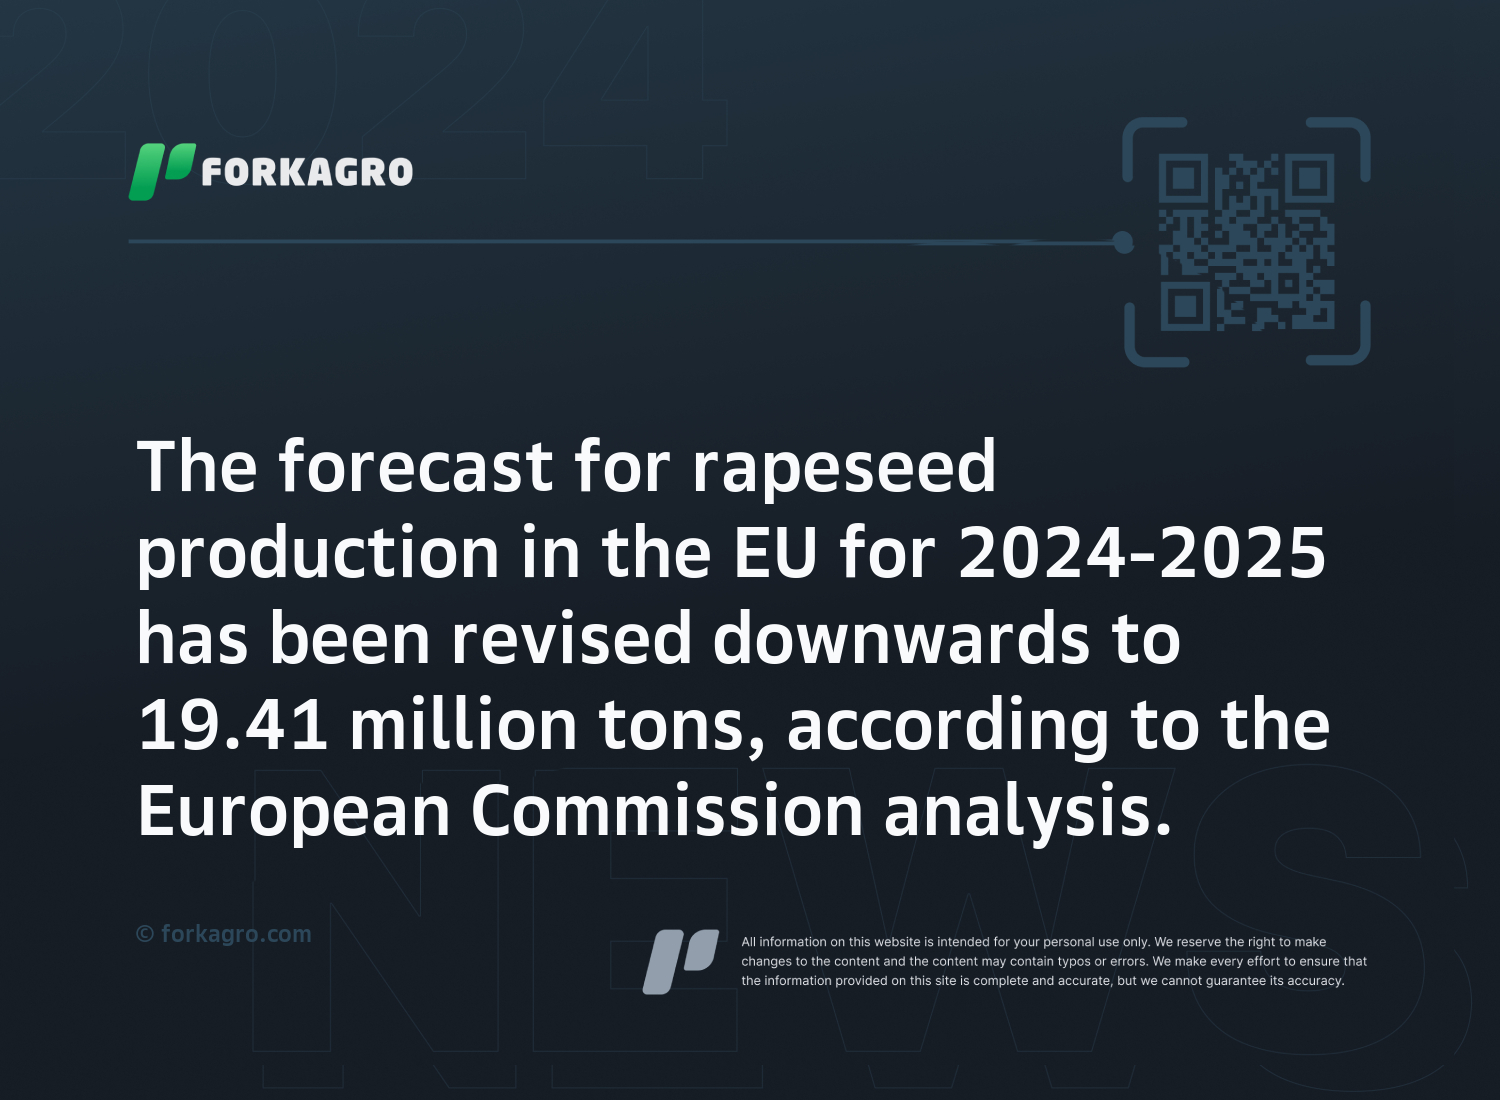 The forecast for rapeseed production in the EU for 2024-2025 has been revised downwards to 19.41 million tons, according to the European Commission analysis.